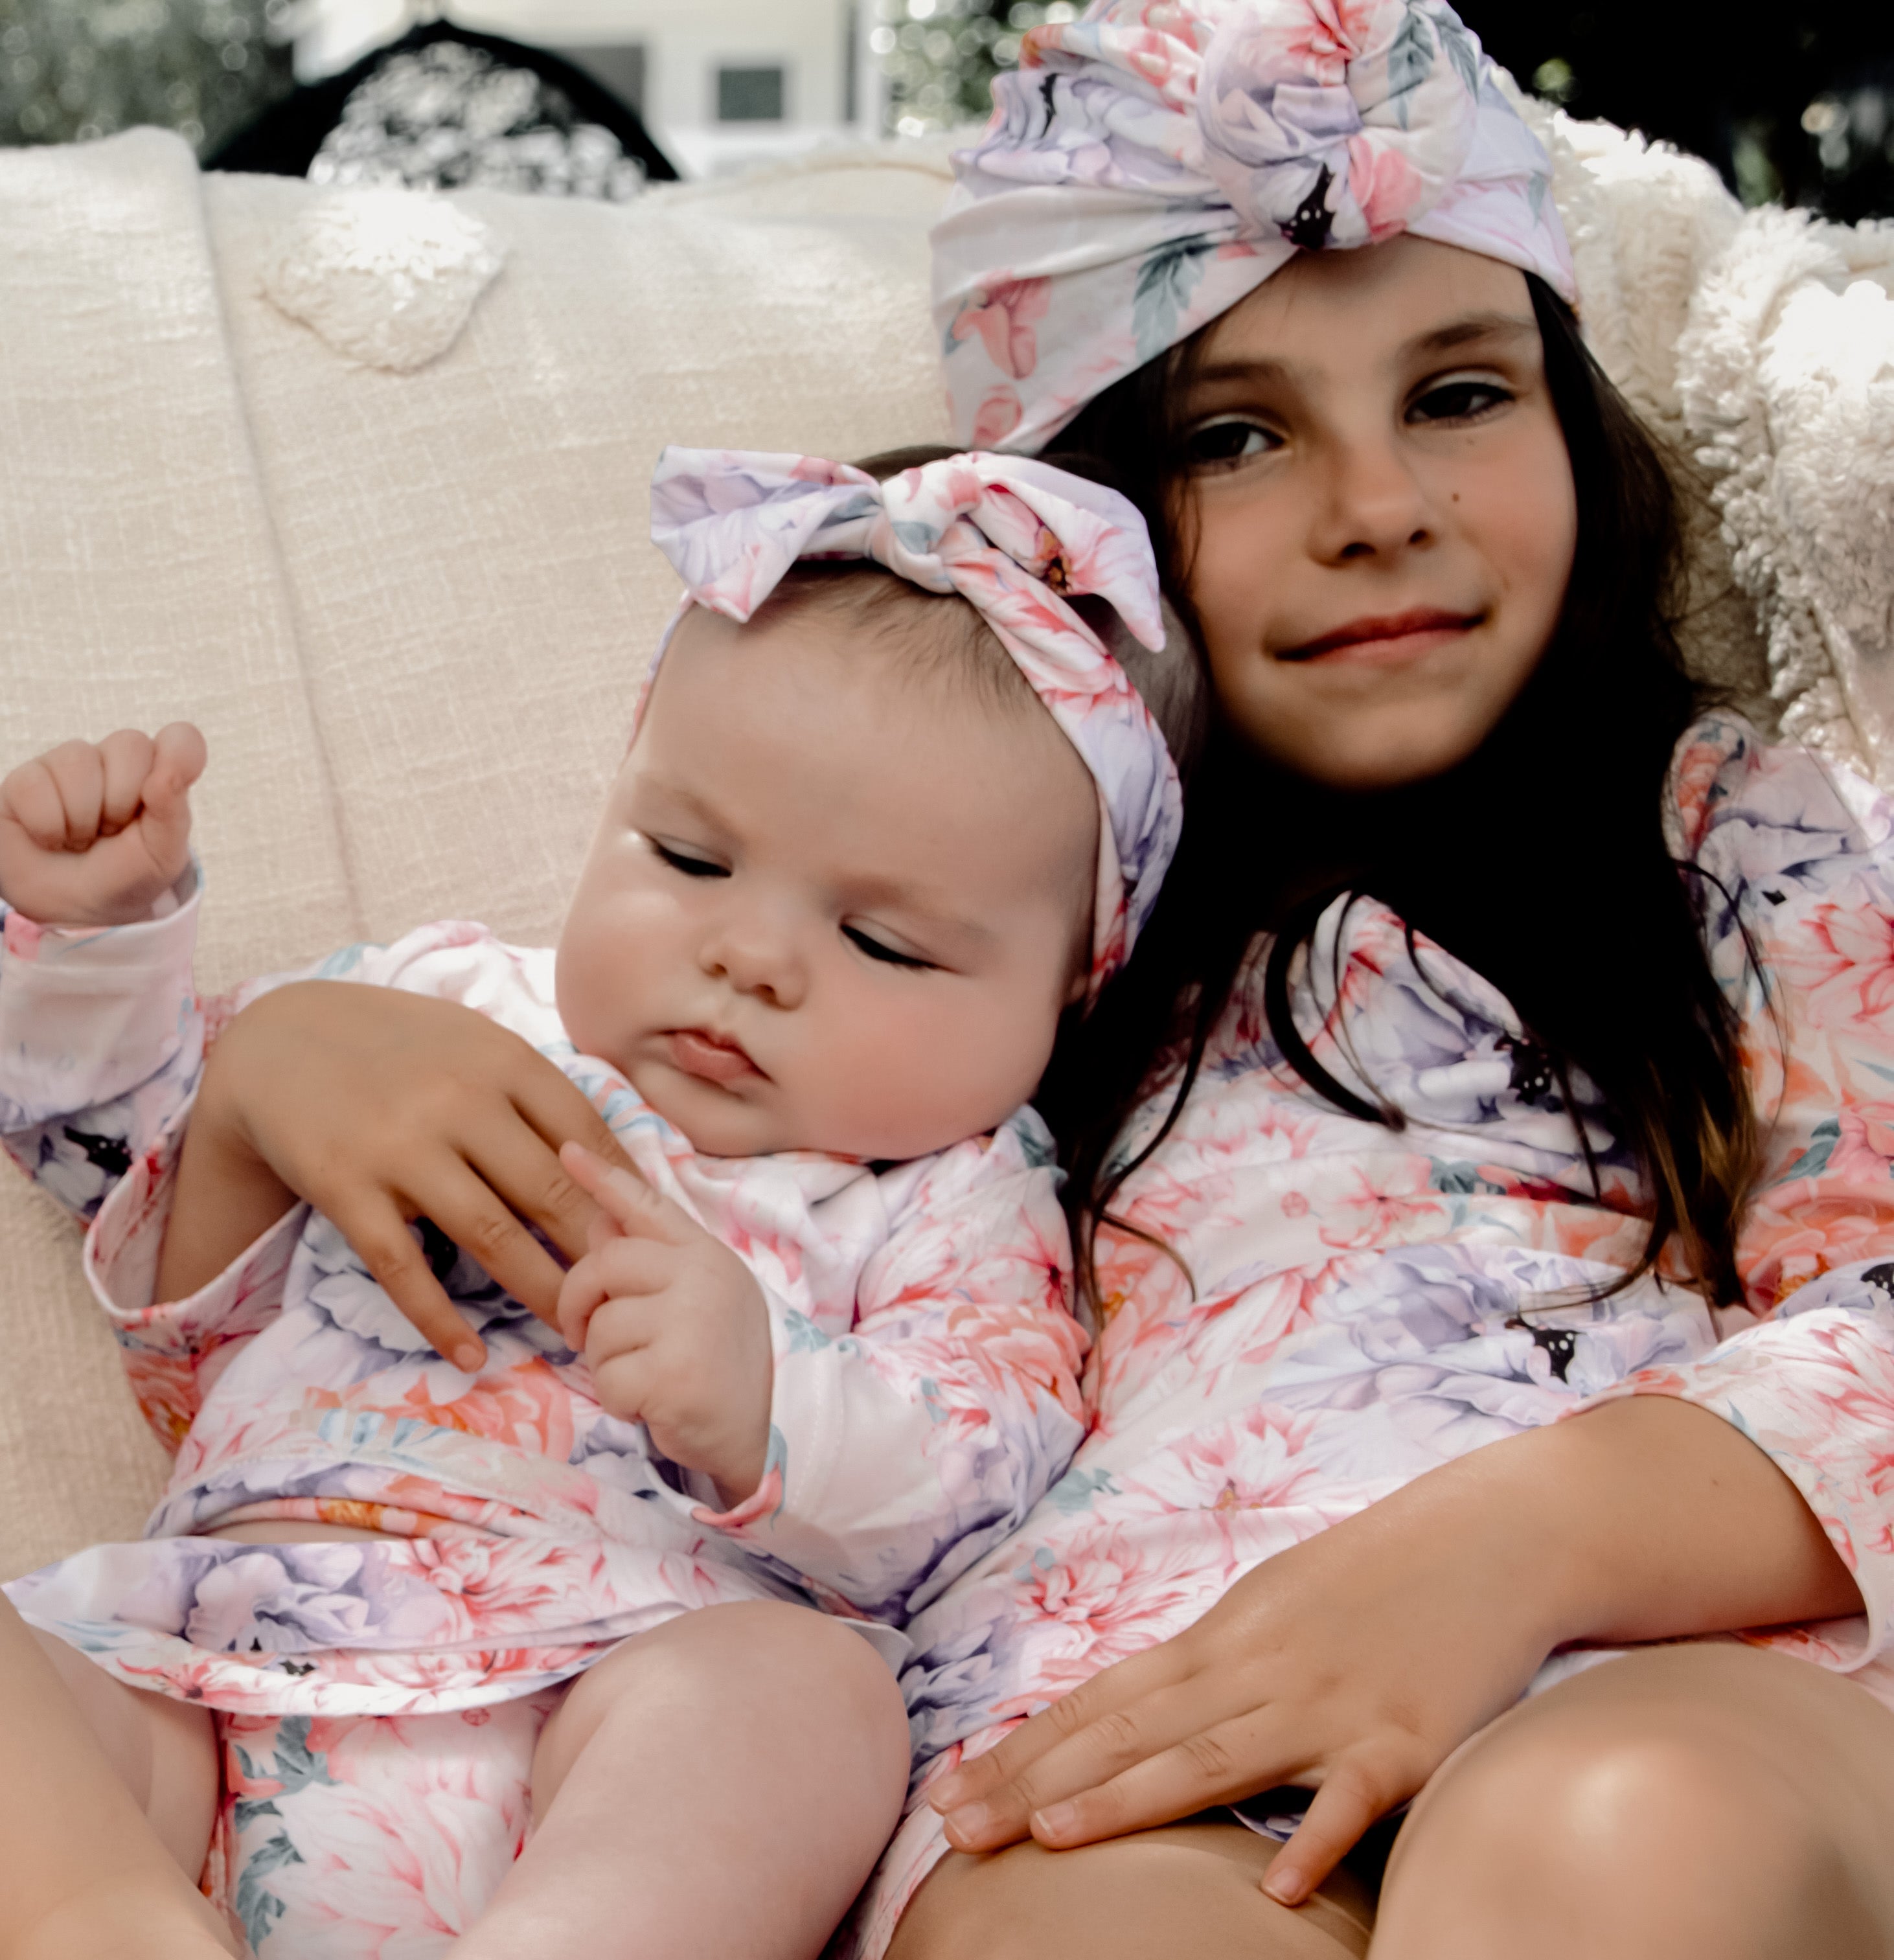 A baby and young girl in long sleeve floral swimwear that is matching